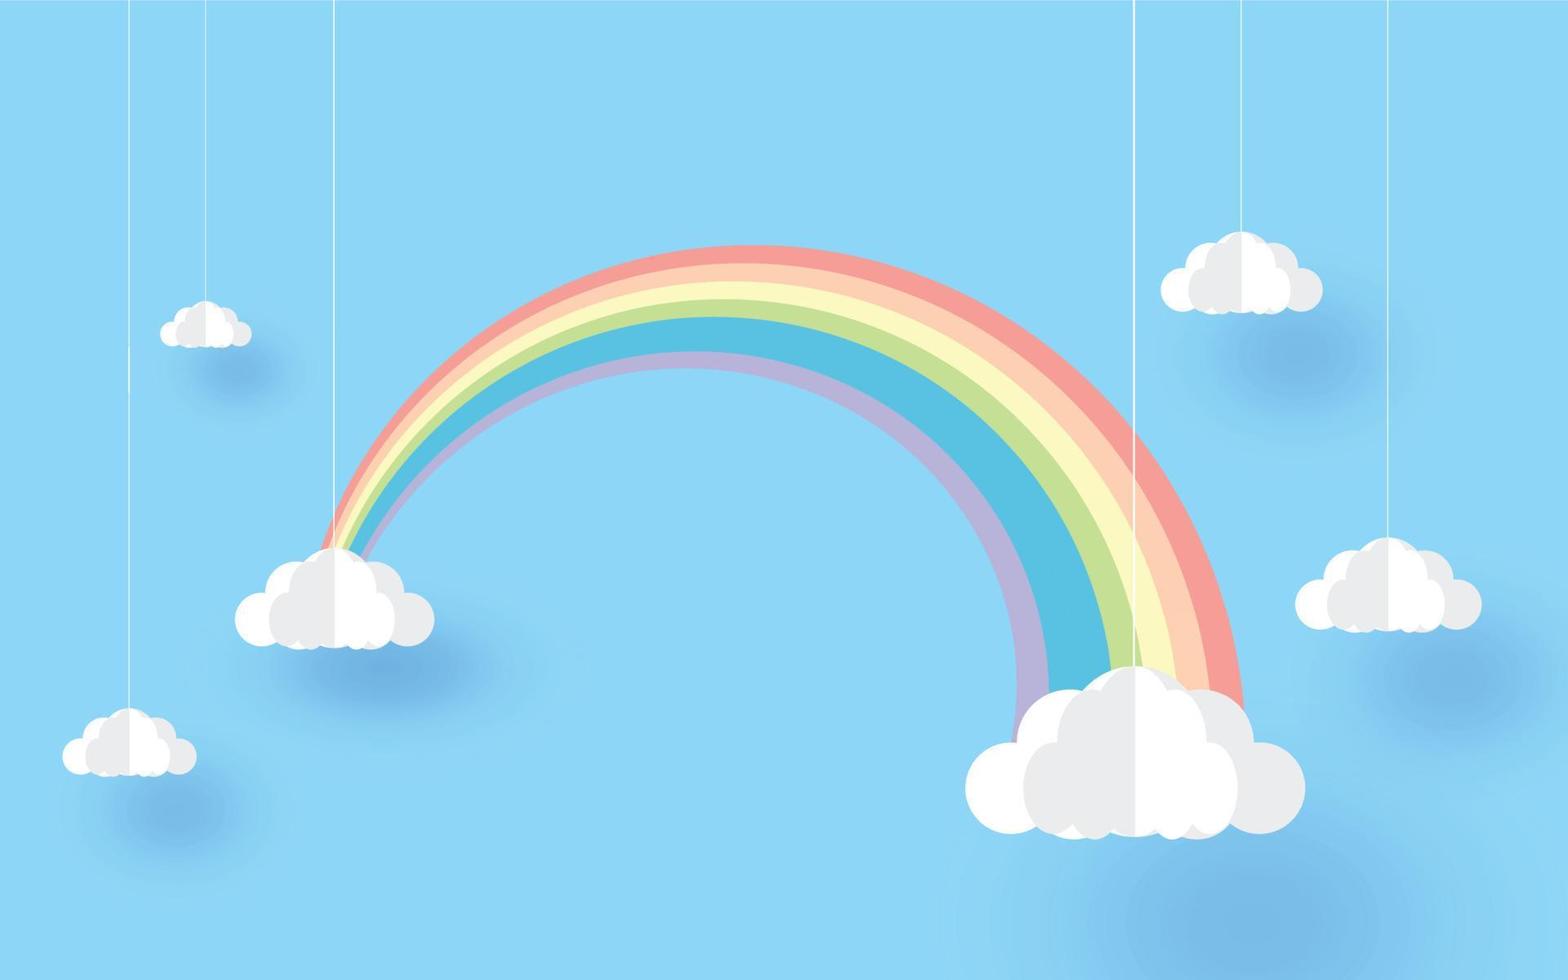 Rainbow and clouds in the sky , paper art style,  wallpaper design. vector